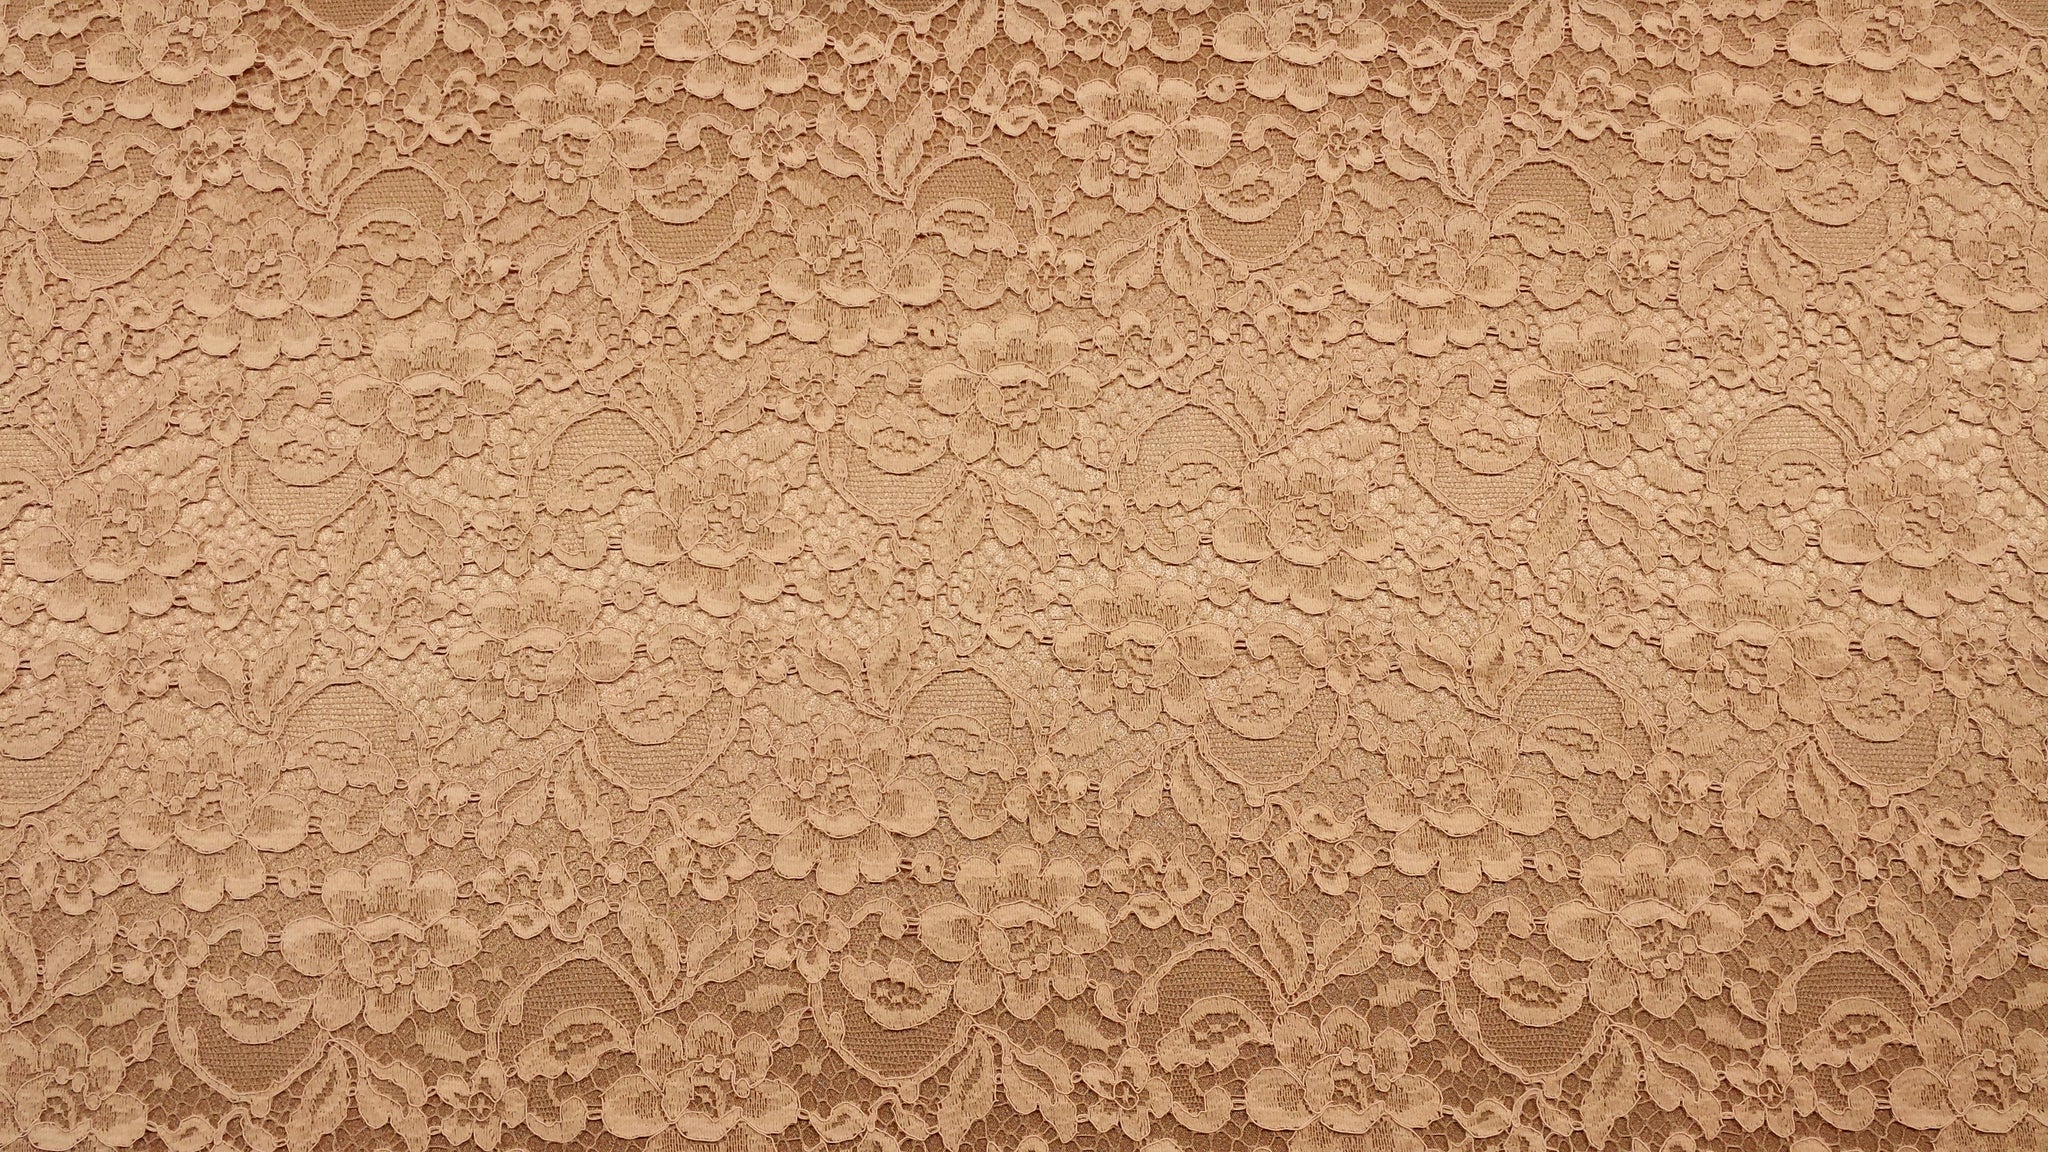 Solstiss Lace – A Fabric Place